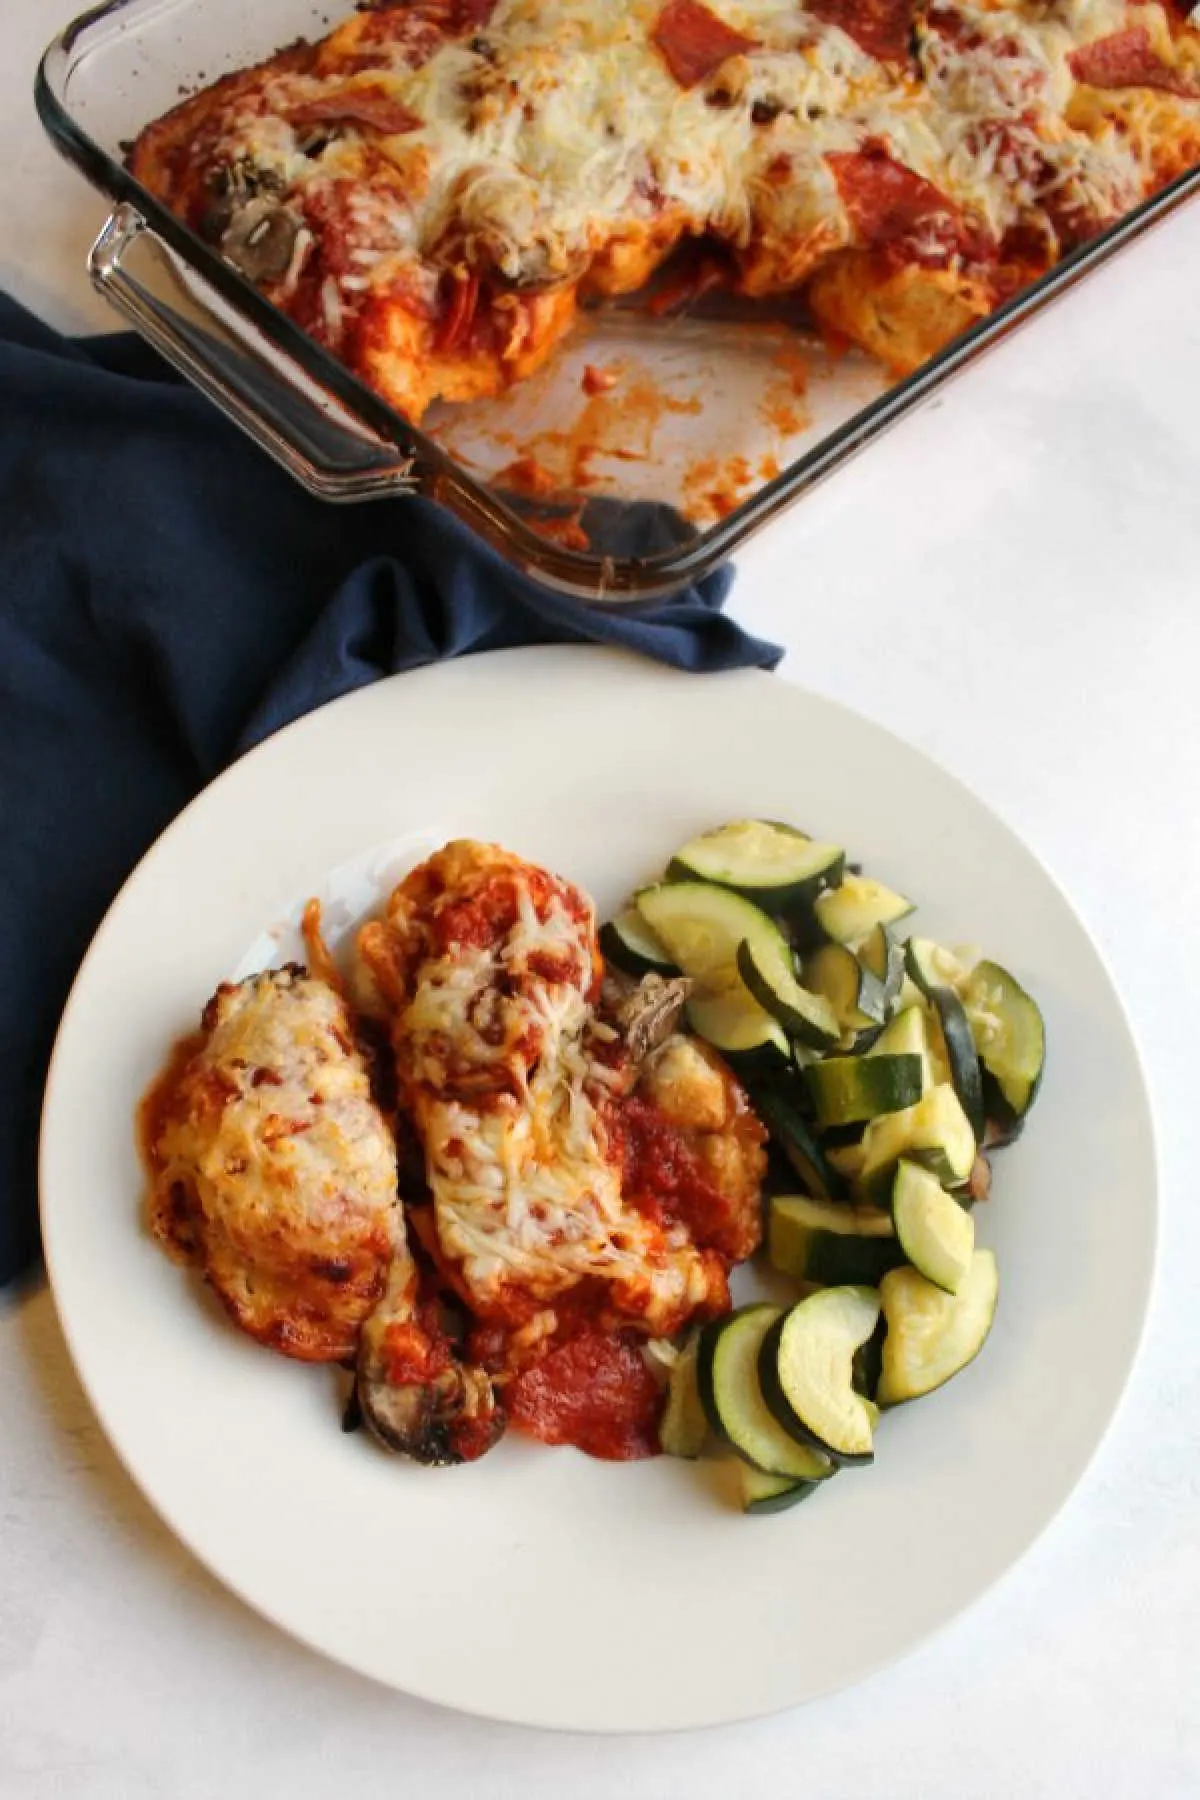 Serving of bubble up pizza casserole on dinner plate with sauteed zucchini, ready to eat.